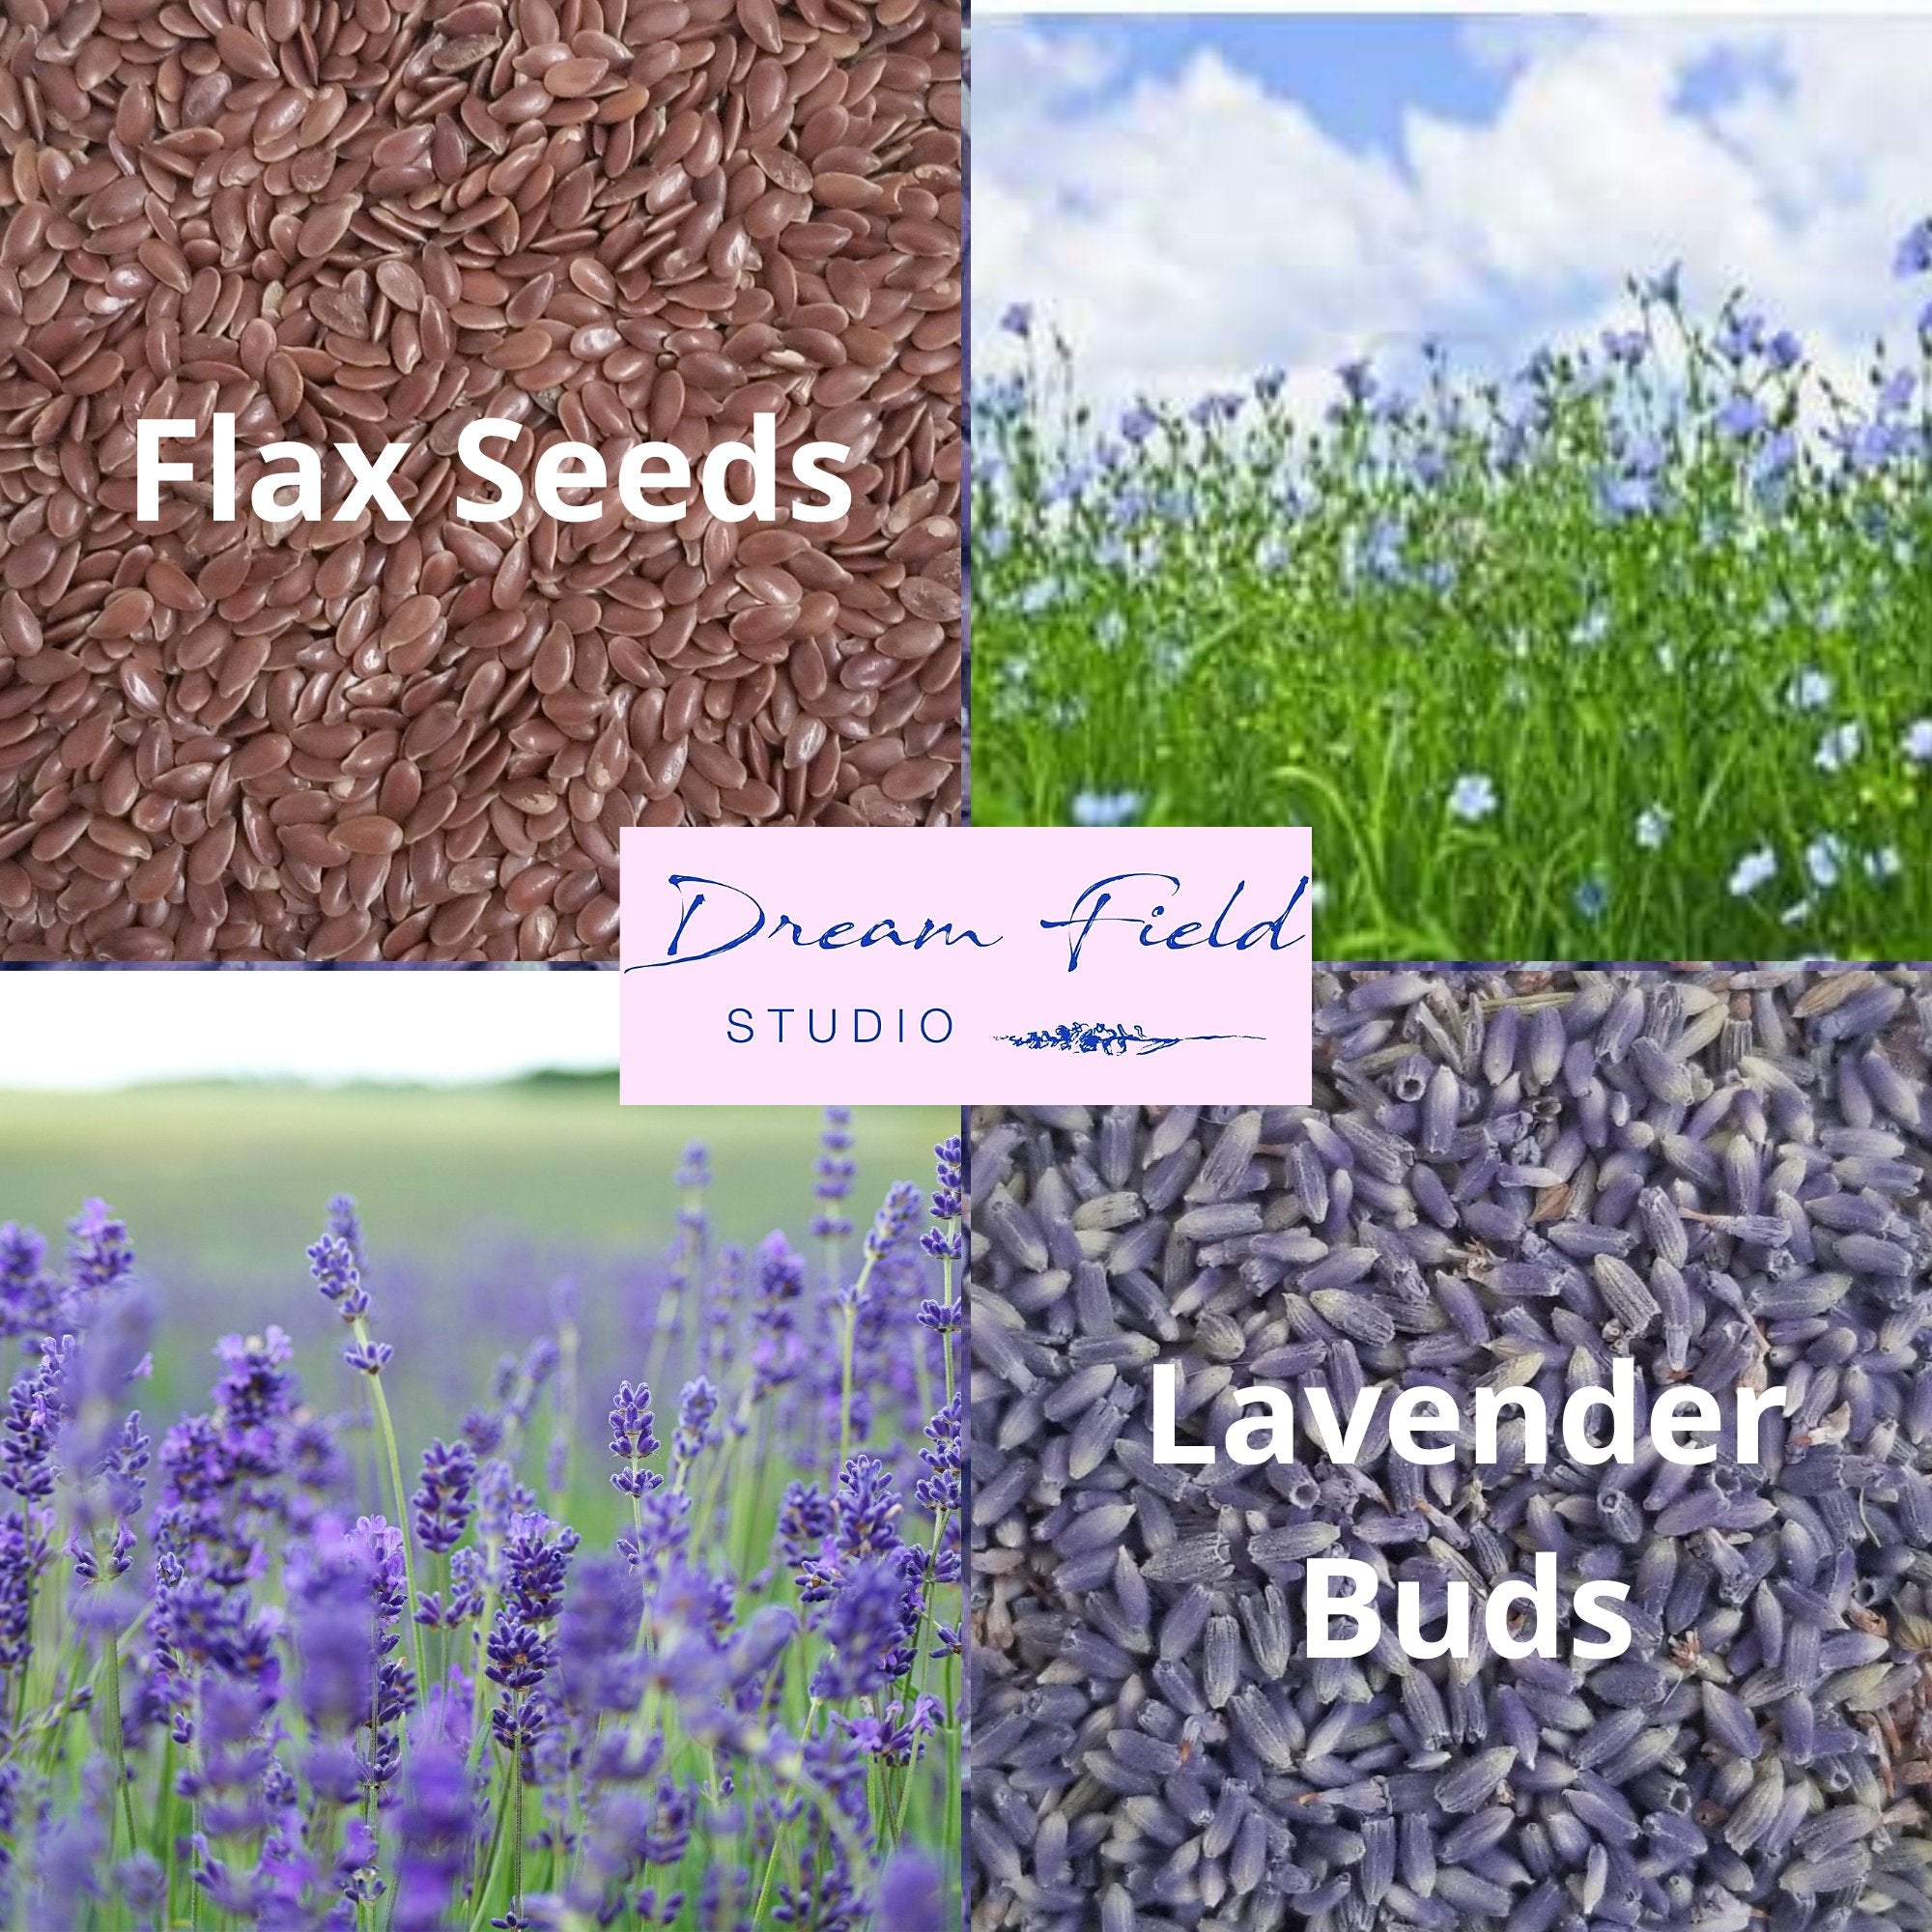 Infographic showing flax seeds, lavender fields and lavender buds